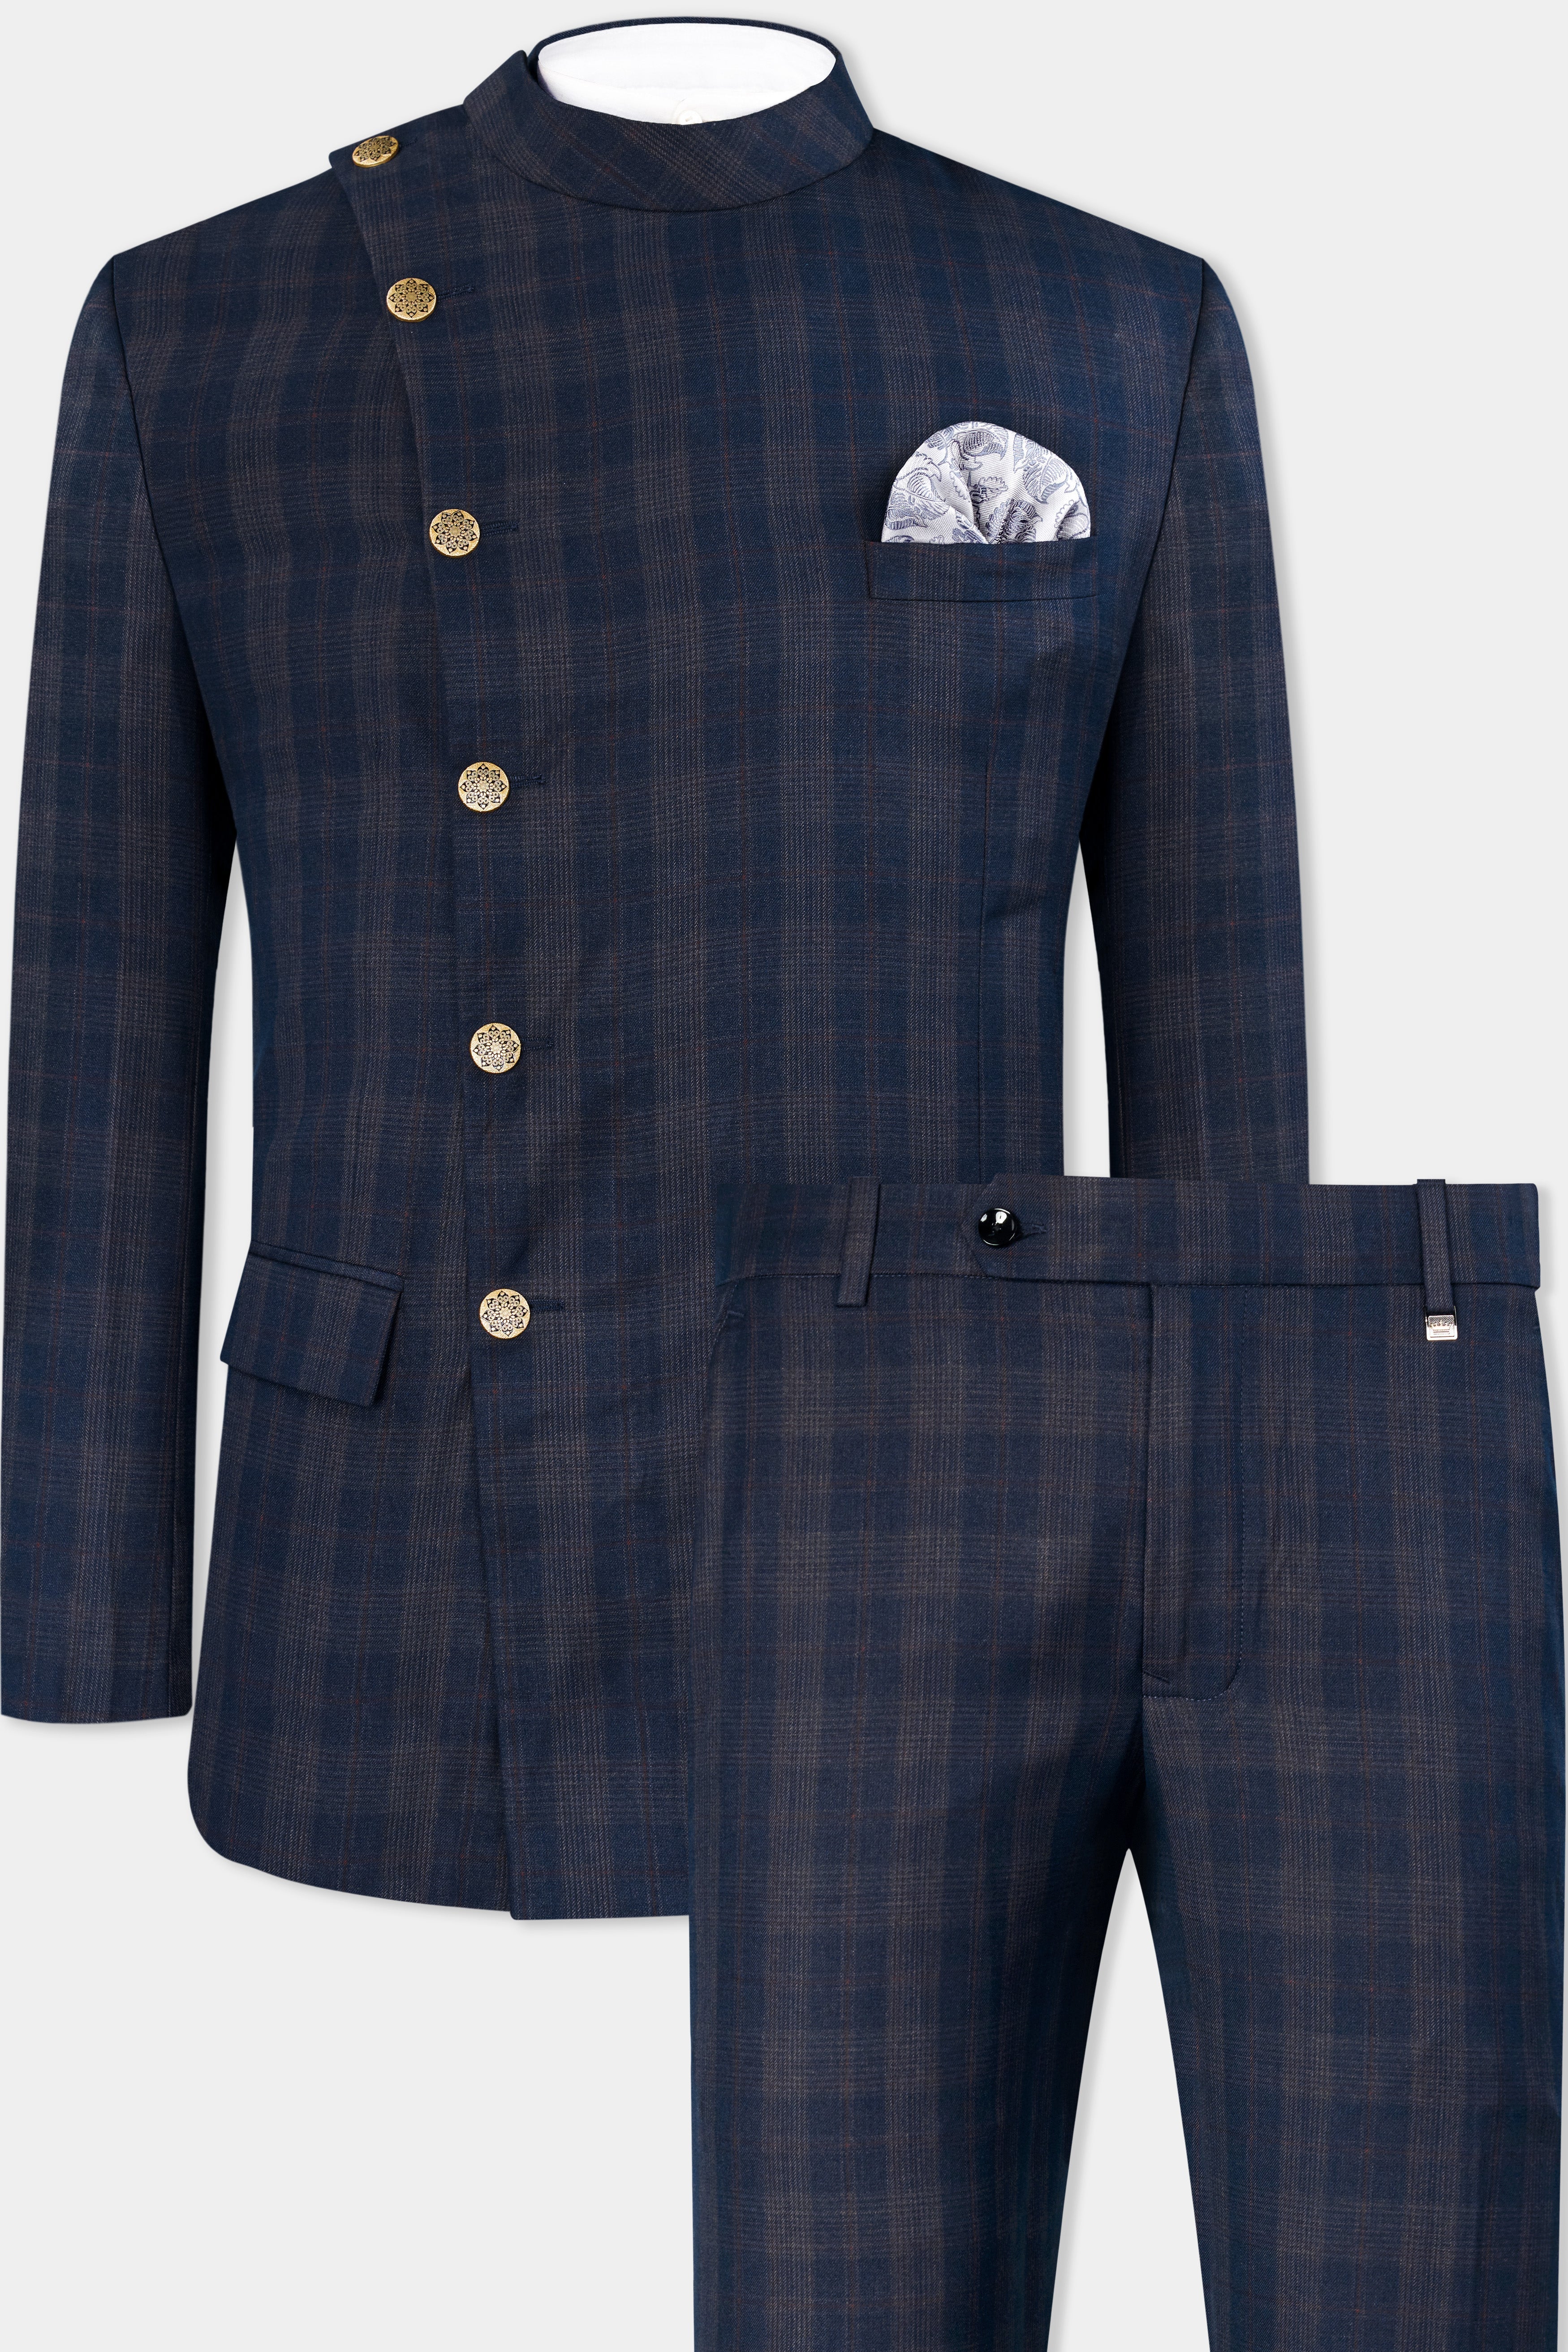 Admiral Blue and Cinereous Brown Plaid Wool Rich Cross Buttoned Bandhgala Suit ST2872-CBG2-36, ST2872-CBG2-38, ST2872-CBG2-40, ST2872-CBG2-42, ST2872-CBG2-44, ST2872-CBG2-46, ST2872-CBG2-48, ST2872-CBG2-50, ST2872-CBG2-52, ST2872-CBG2-54, ST2872-CBG2-56, ST2872-CBG2-58, ST2872-CBG2-60